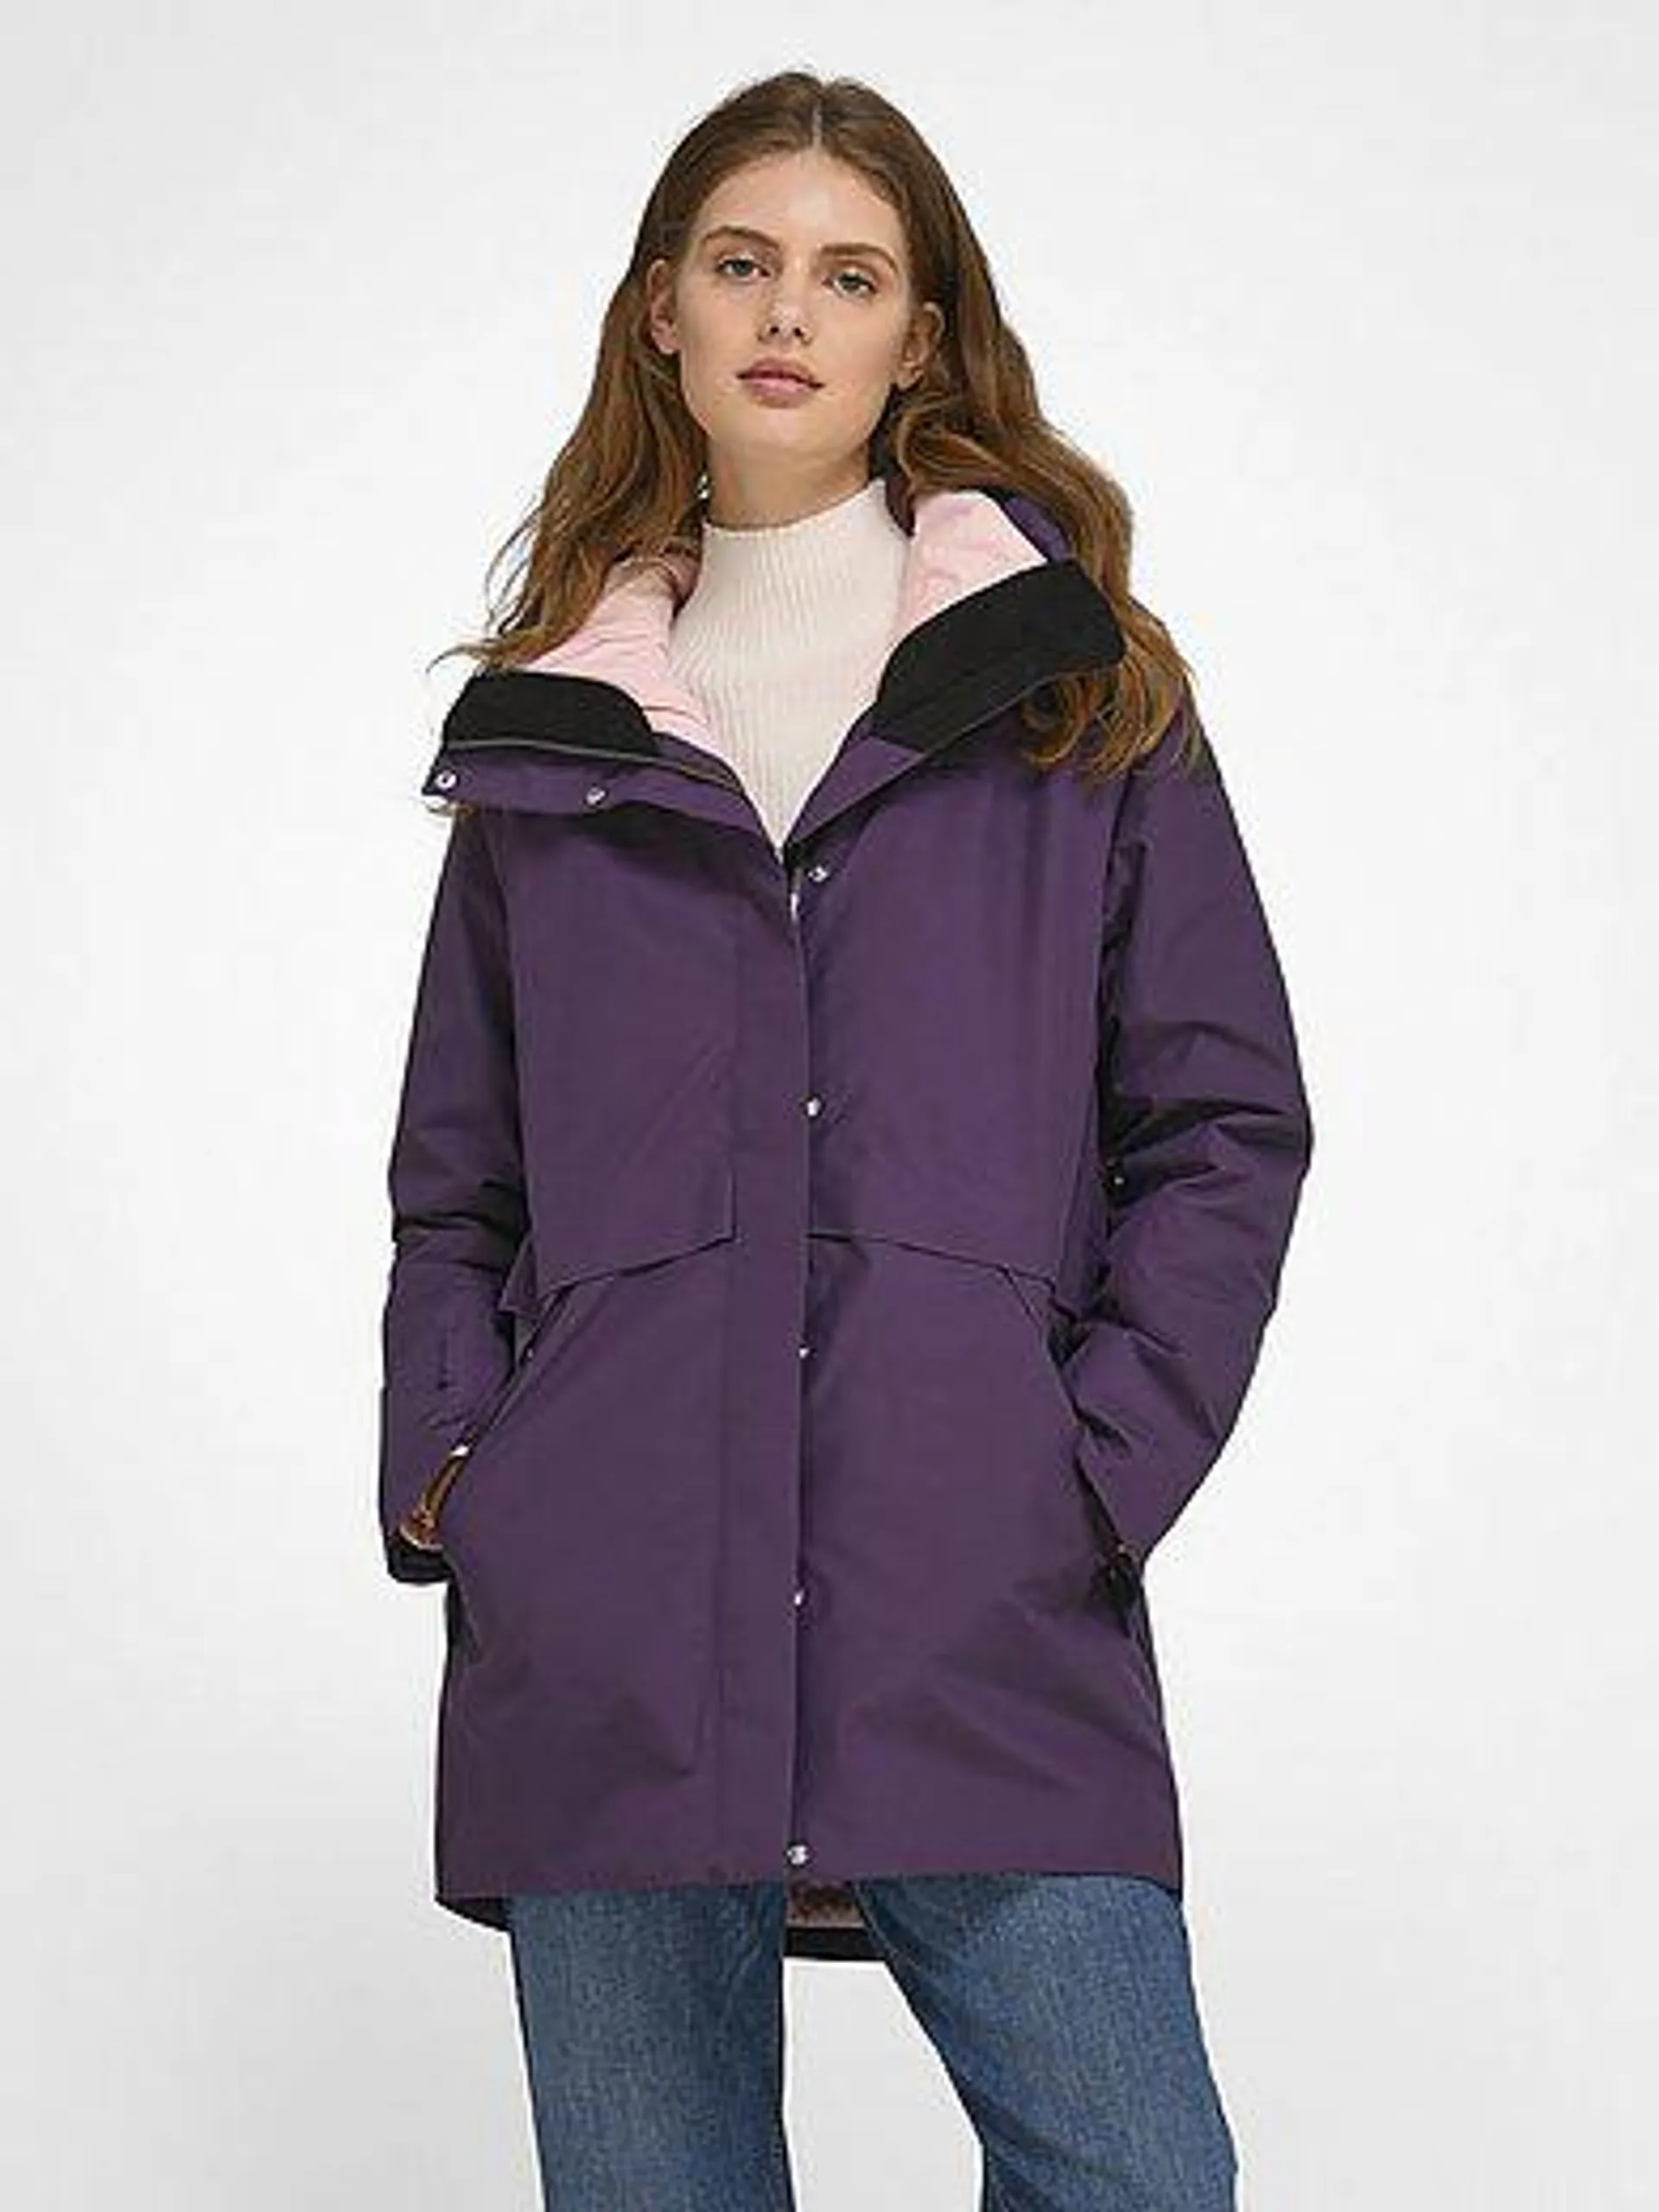 3-in-1 jacket with a detachable hood